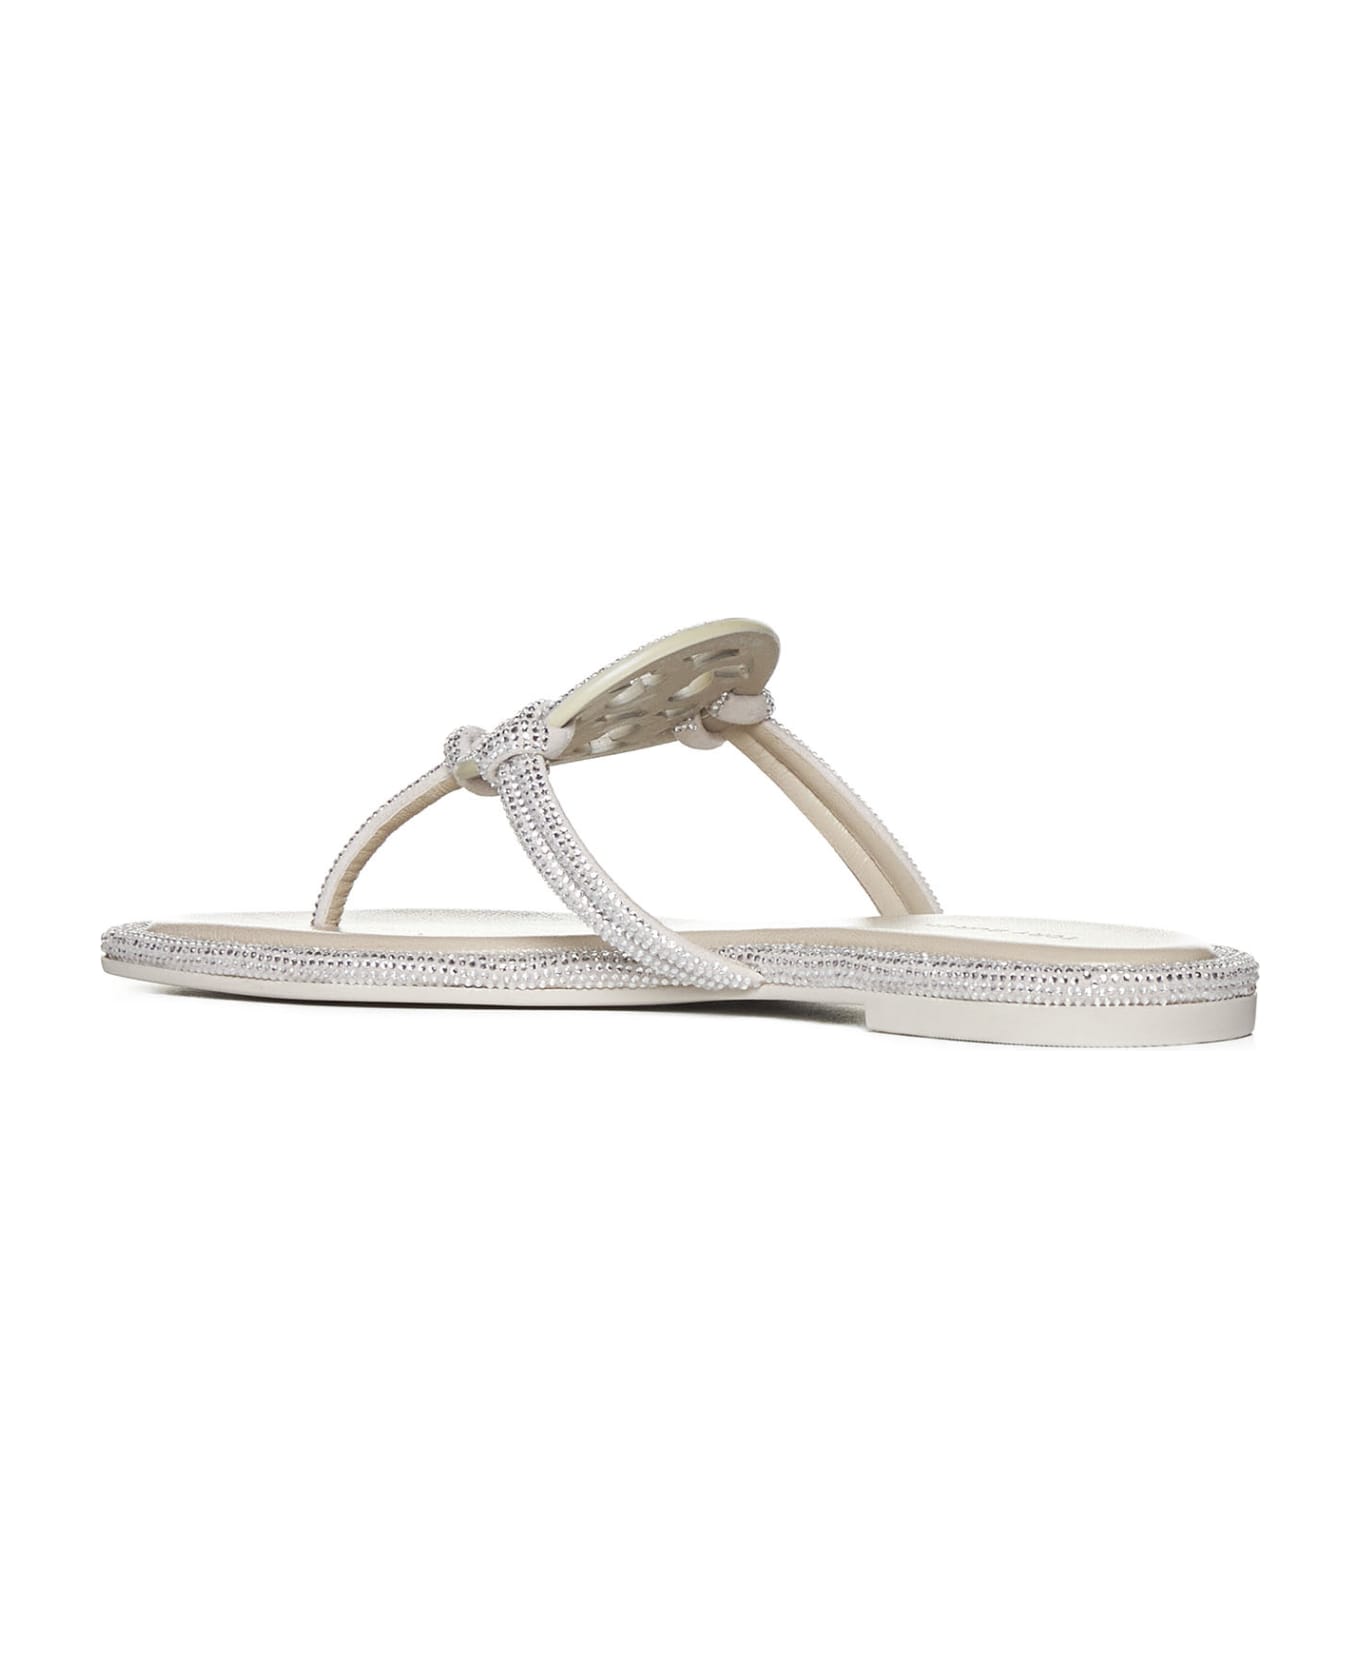 Tory Burch Miller Knotted Pave Sandals - Gray サンダル